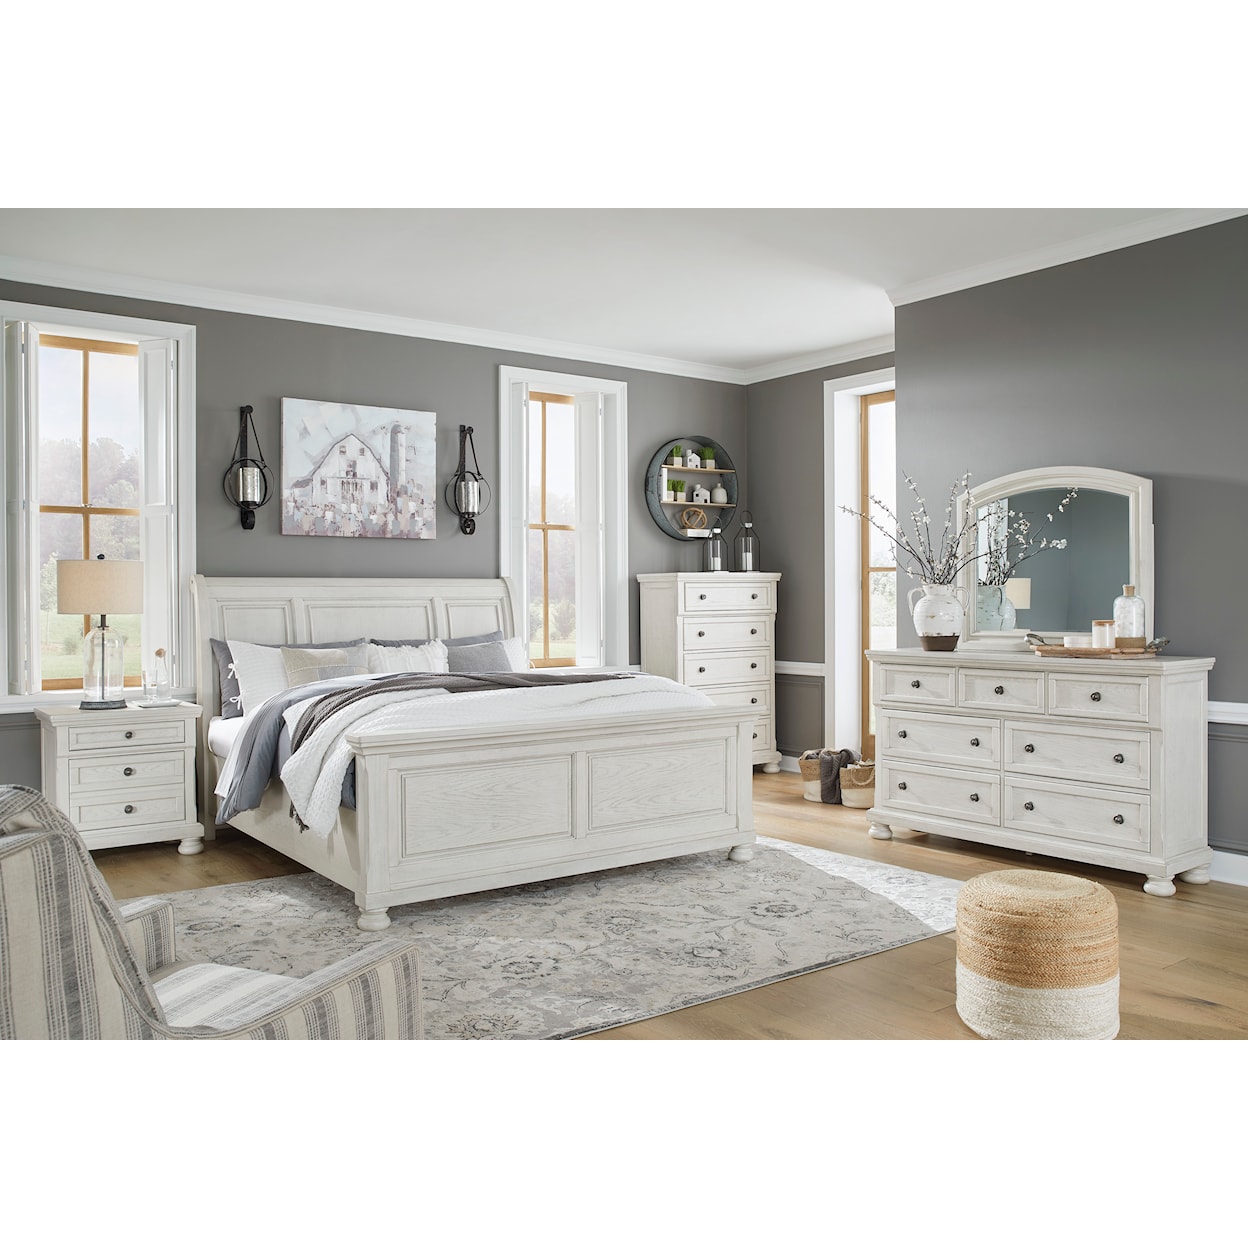 Signature Robbinsdale King Sleigh Bed